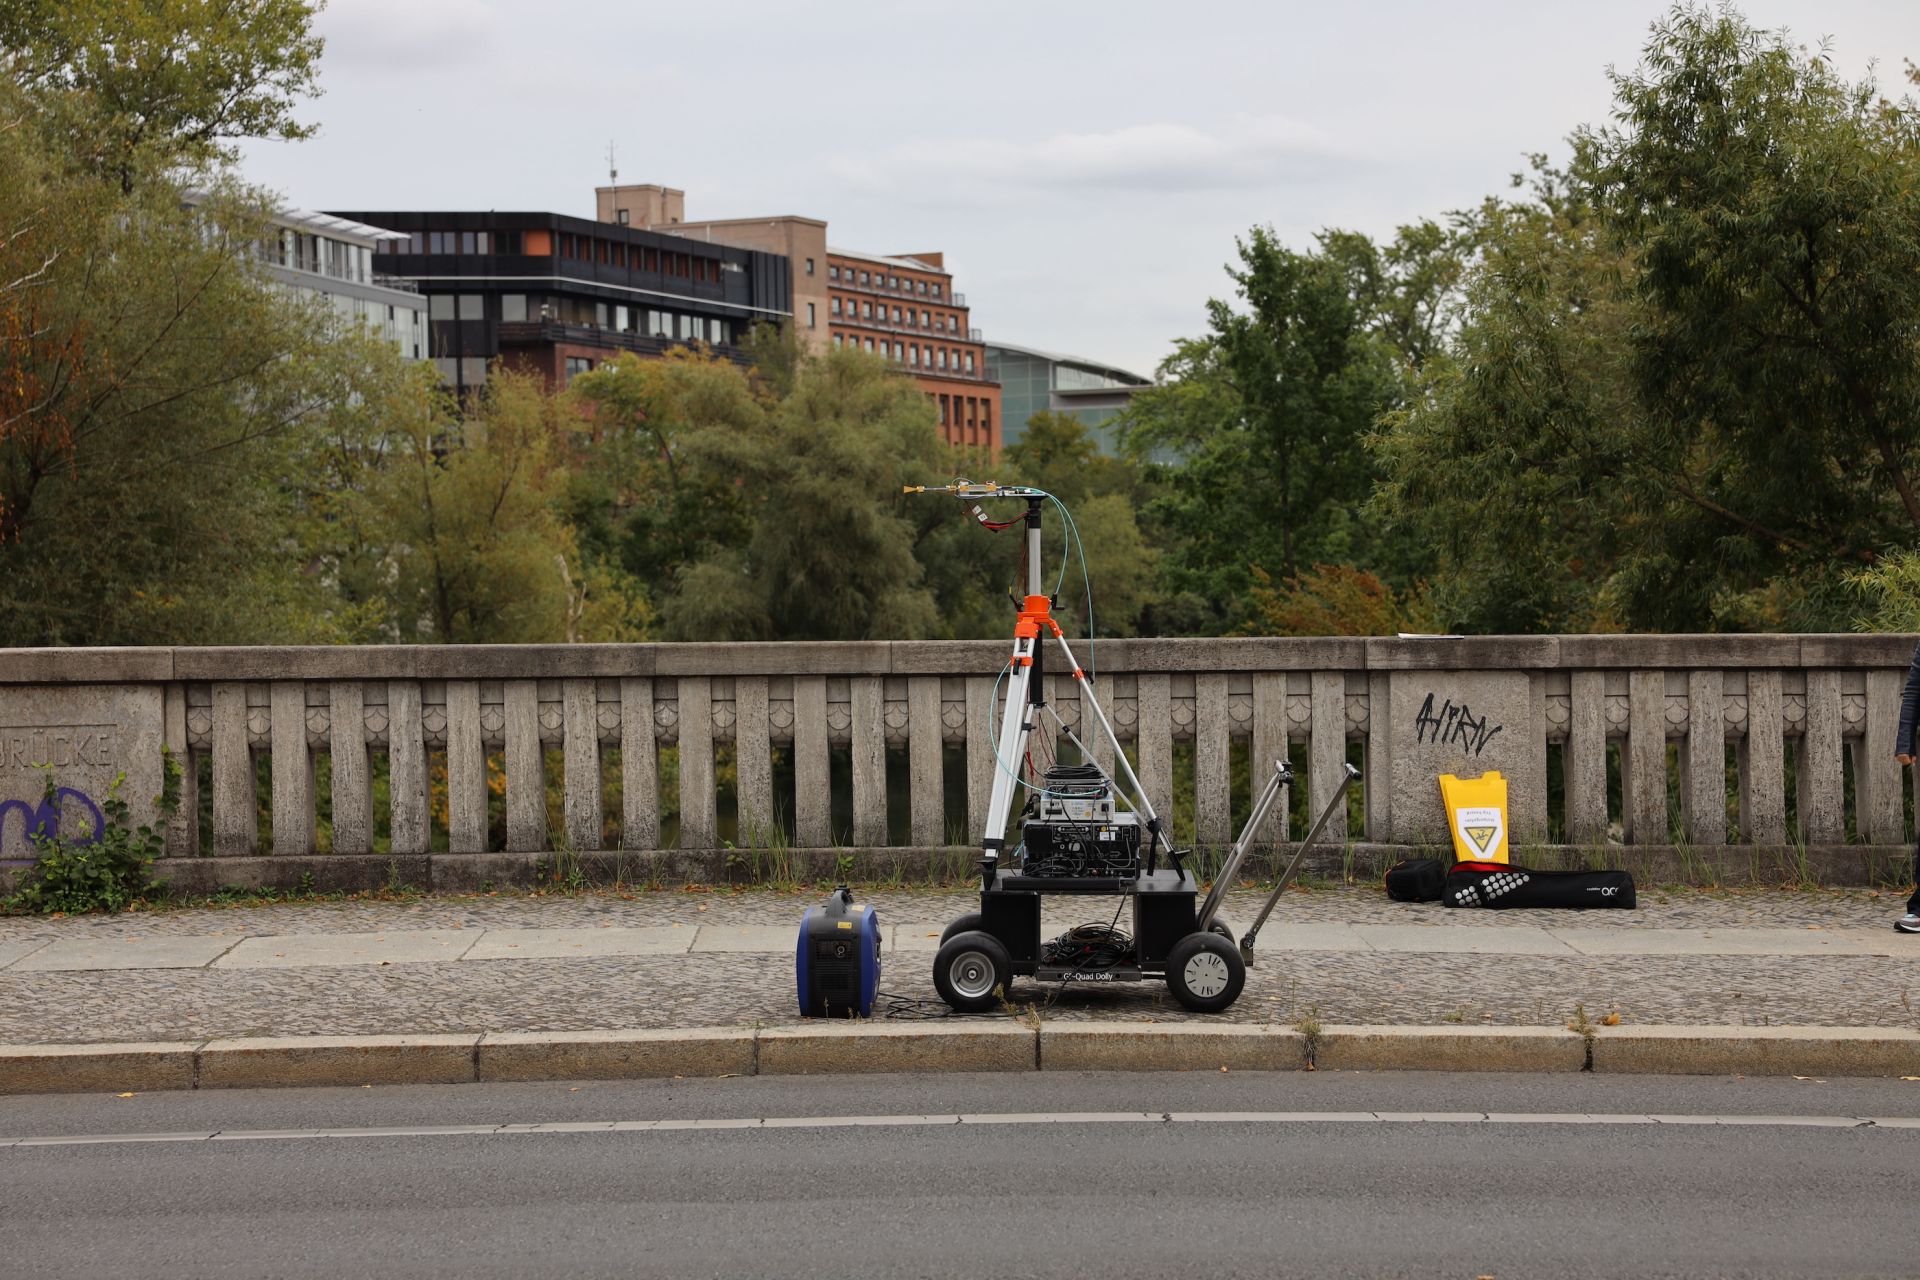 The receiver measurement setup on wheels can be seen on a traffic bridge with trees and buildings in the background.